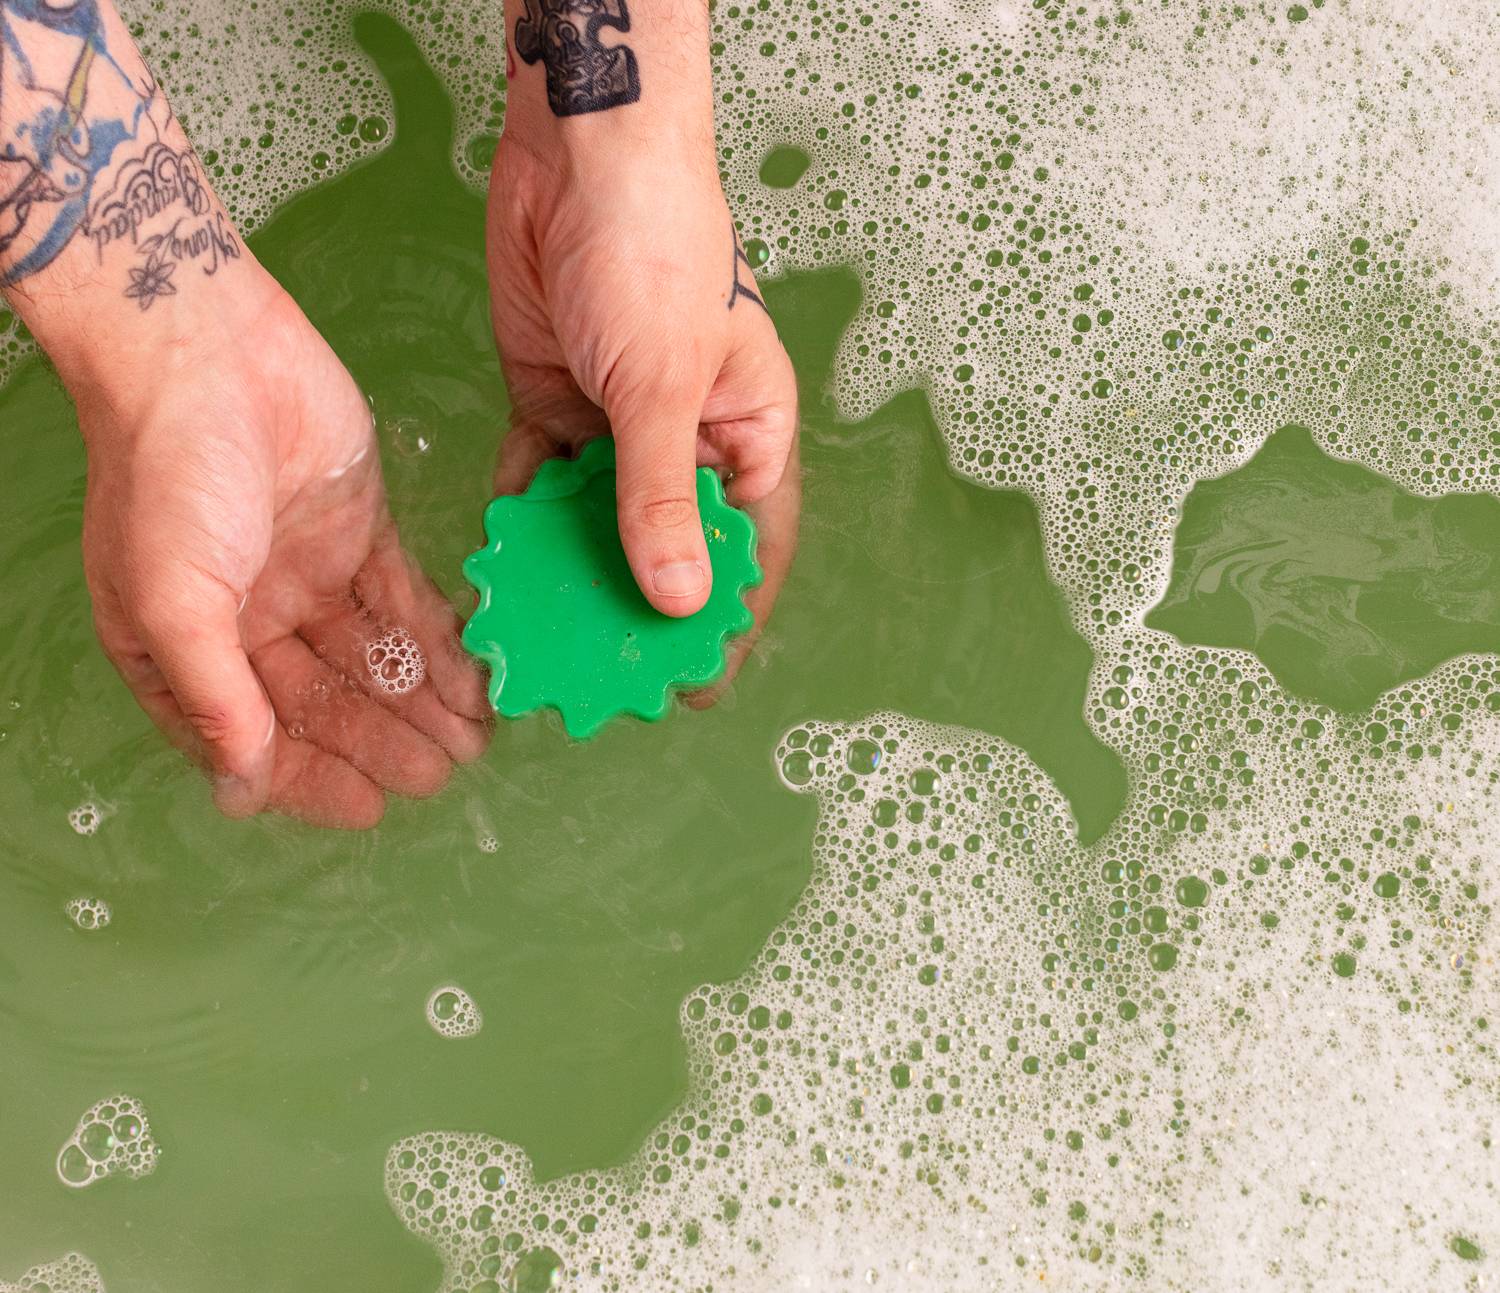 Image shows the model using the lettuce-shaped soap in the bath water surrounded by bubbles.